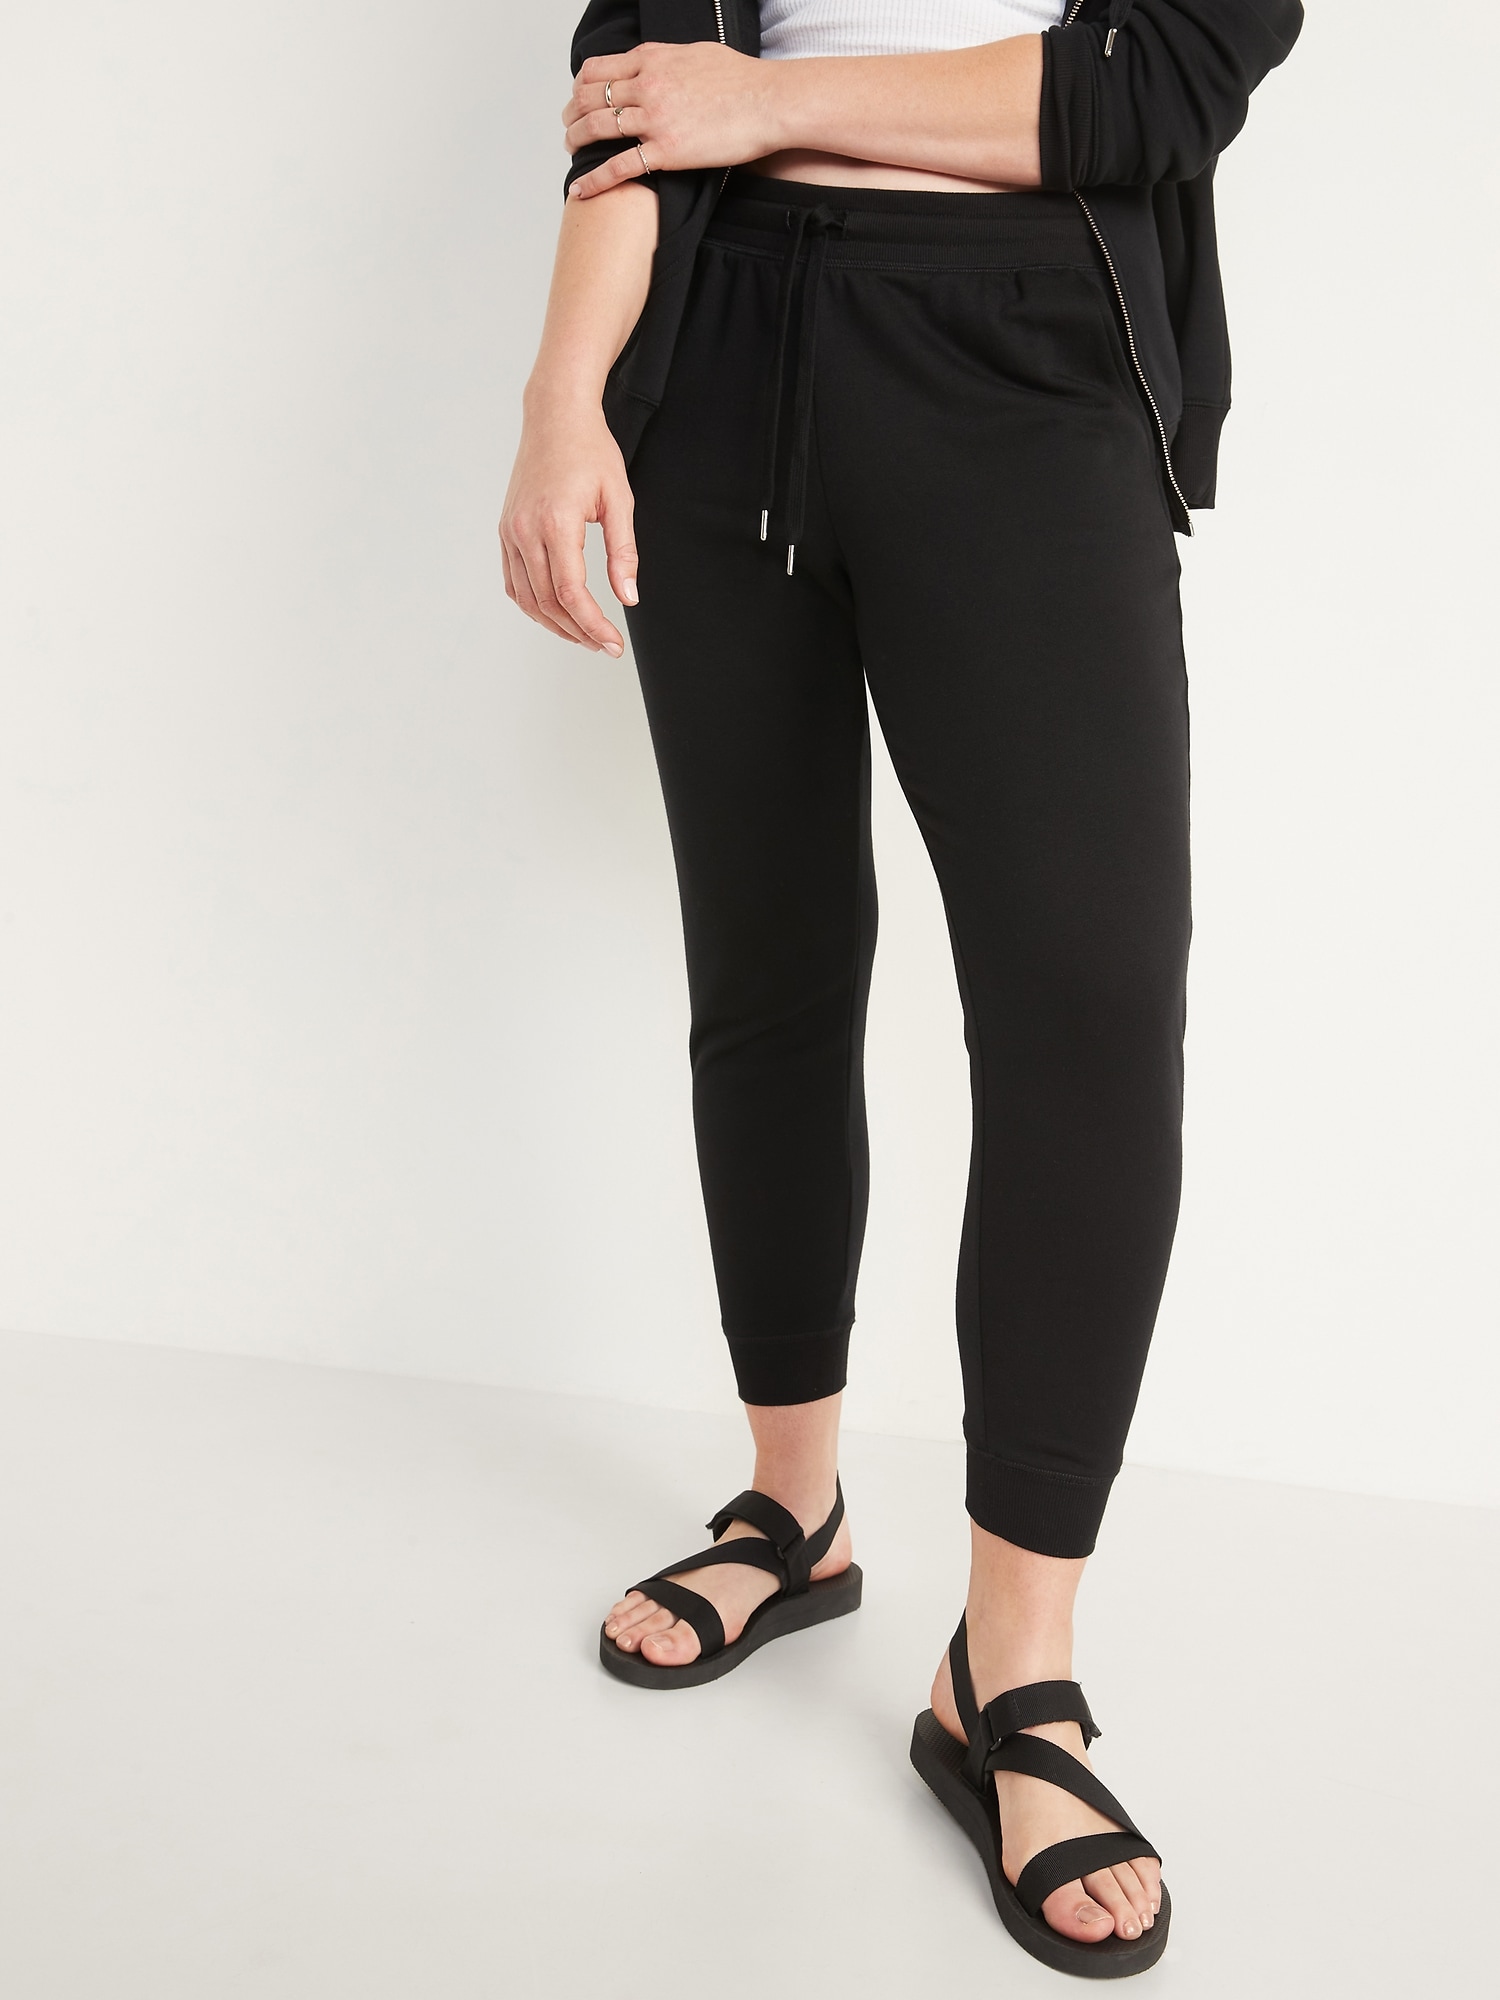 Mid-Rise Vintage Street Jogger Pants for Women | Old Navy